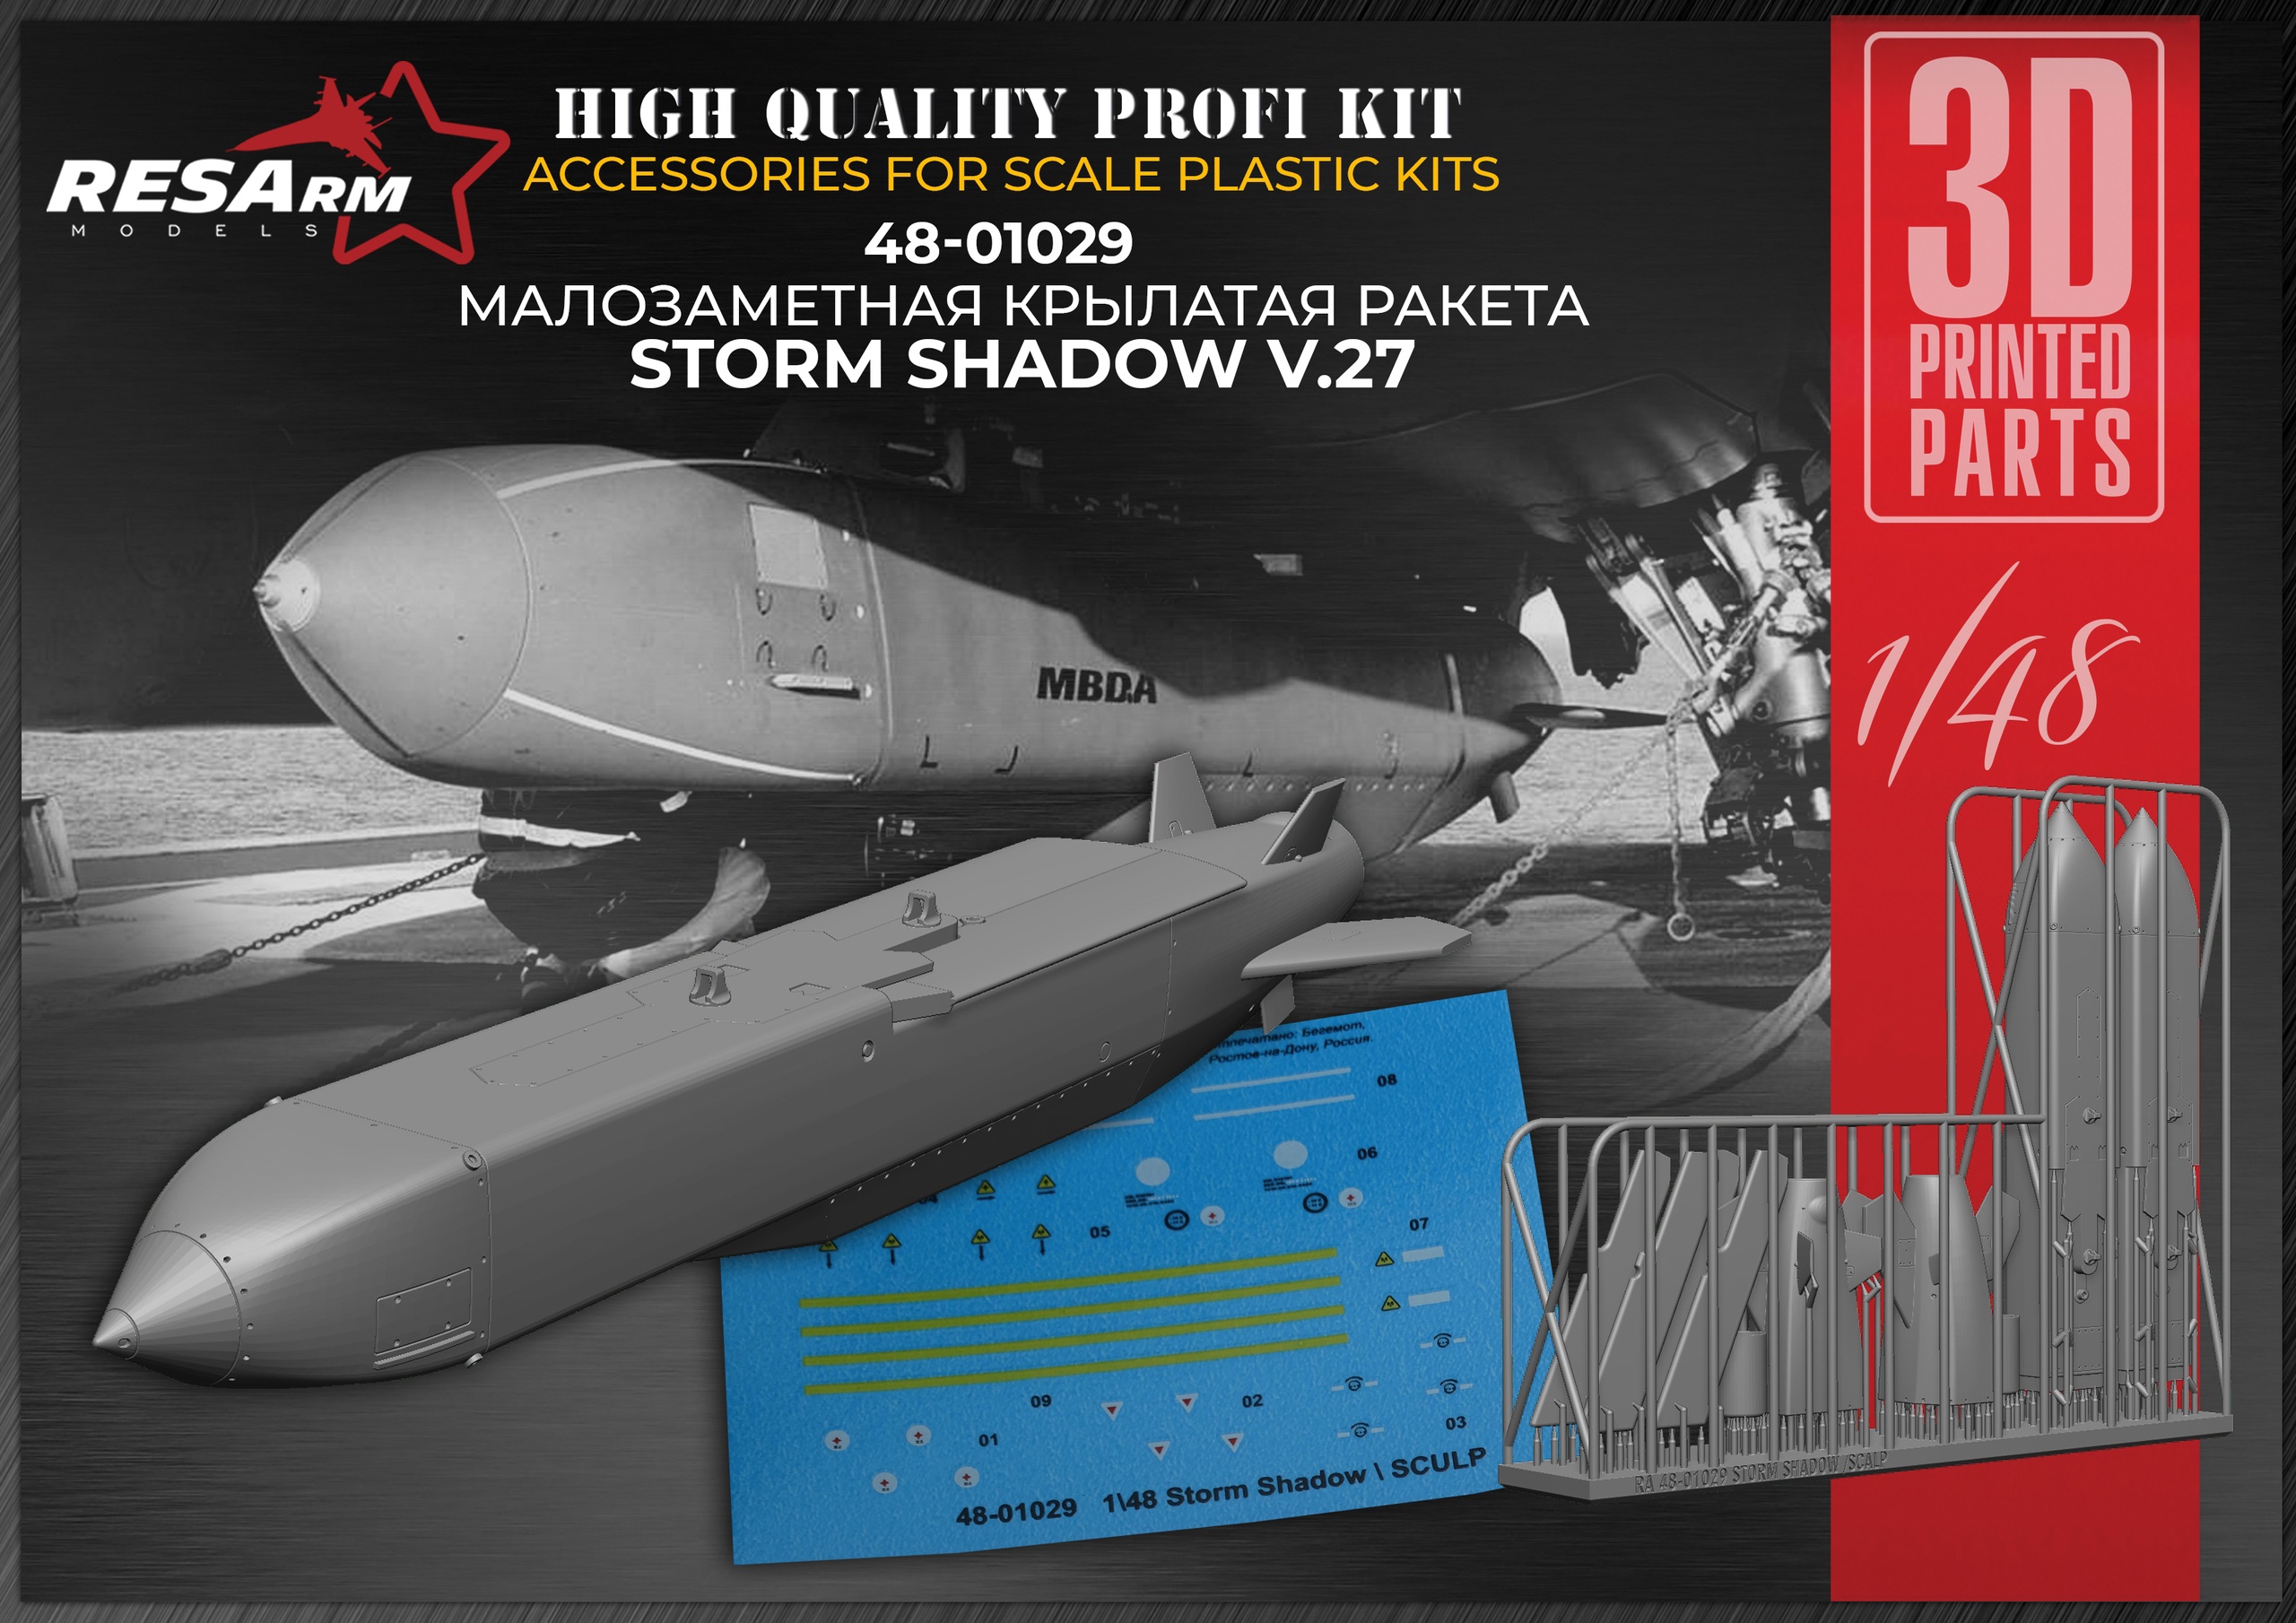 Additions (3D resin printing) 1/48 STORM SHADOW V.27 cruise missile  (RESArm)